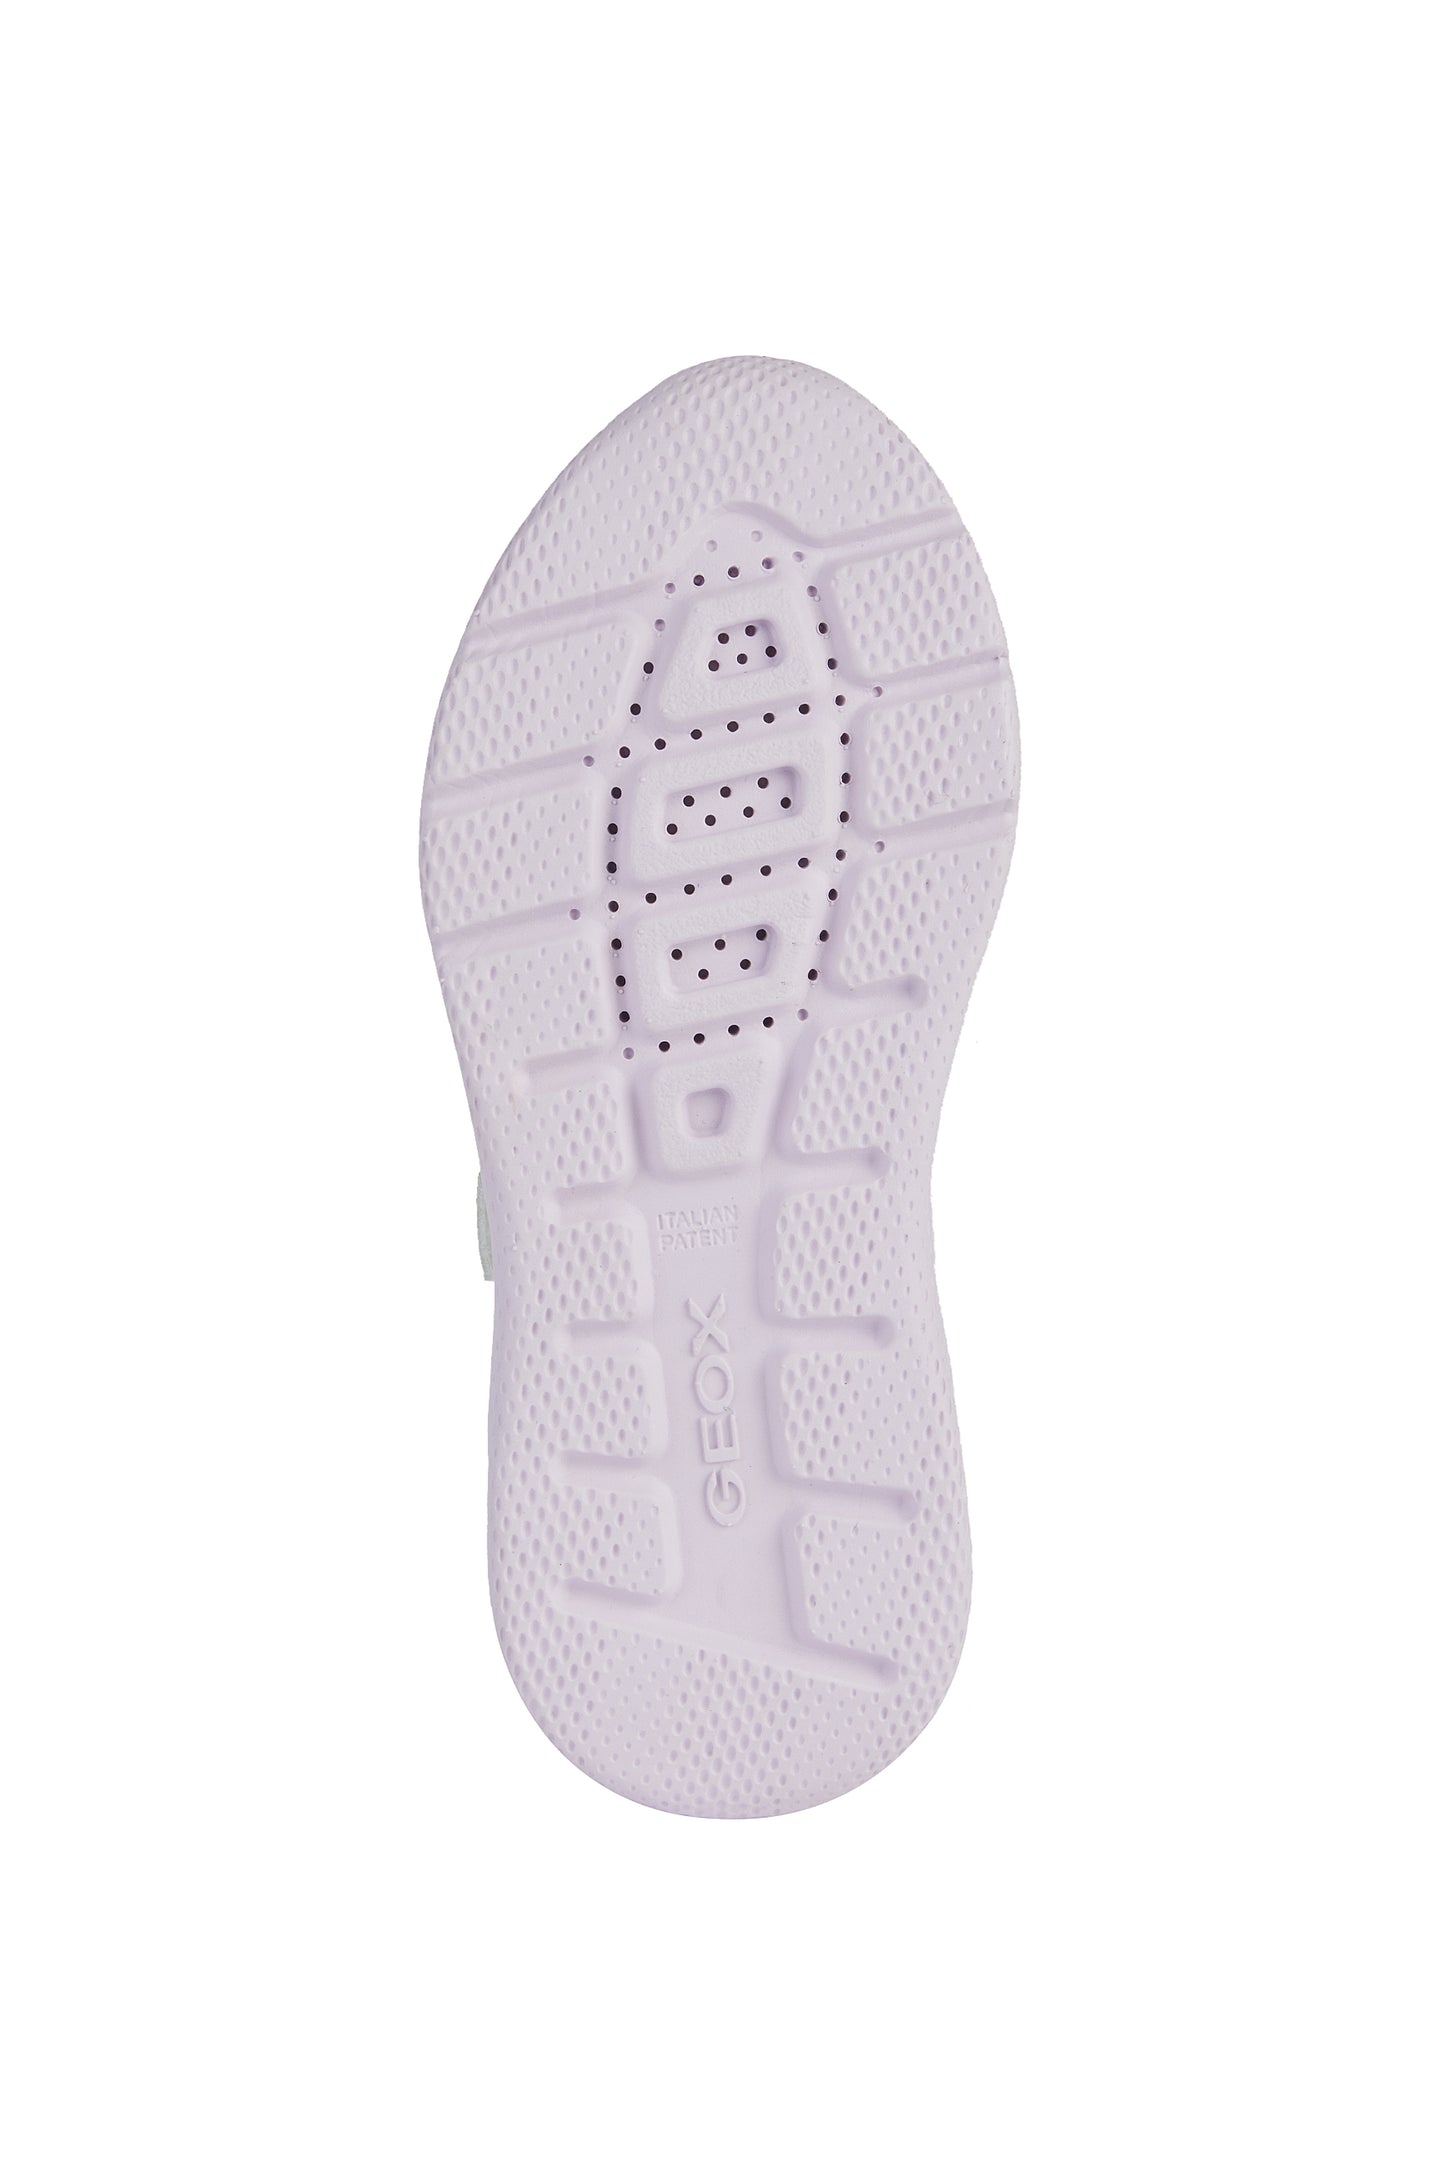 A girls trainer by Geox, style J Sprintye, in white with yellow and pink trim and velcro and blue bungee lace fastening. View of sole.